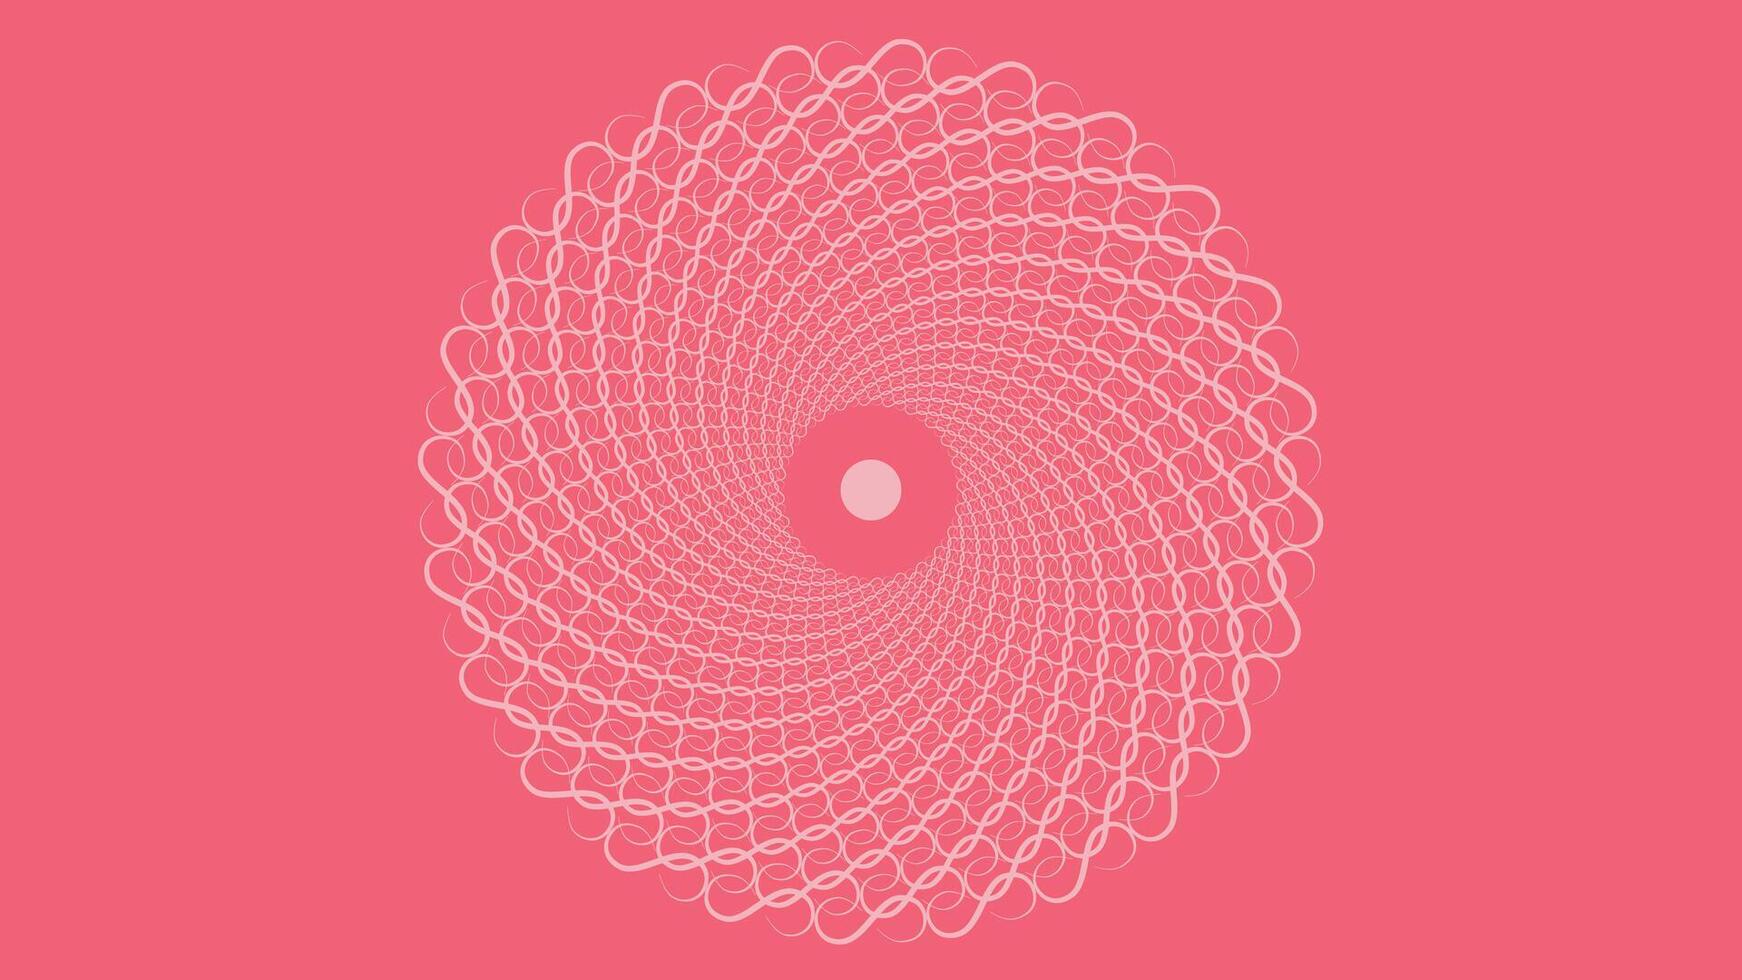 Abstract spiral pink and red love women's day background in red vector